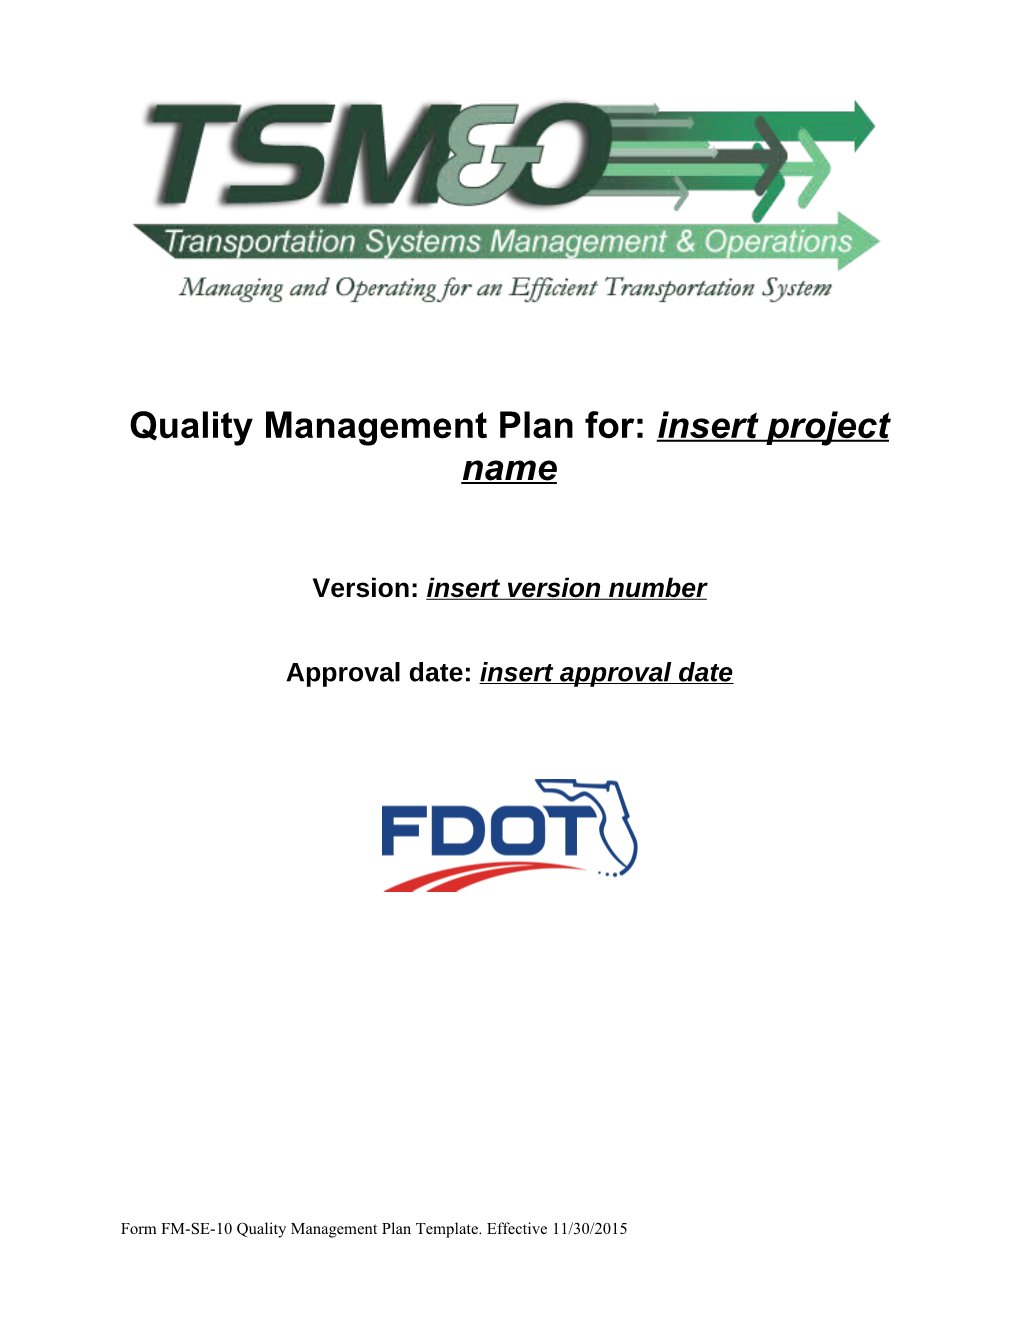 Quality Management Plan For:Insert Project Name